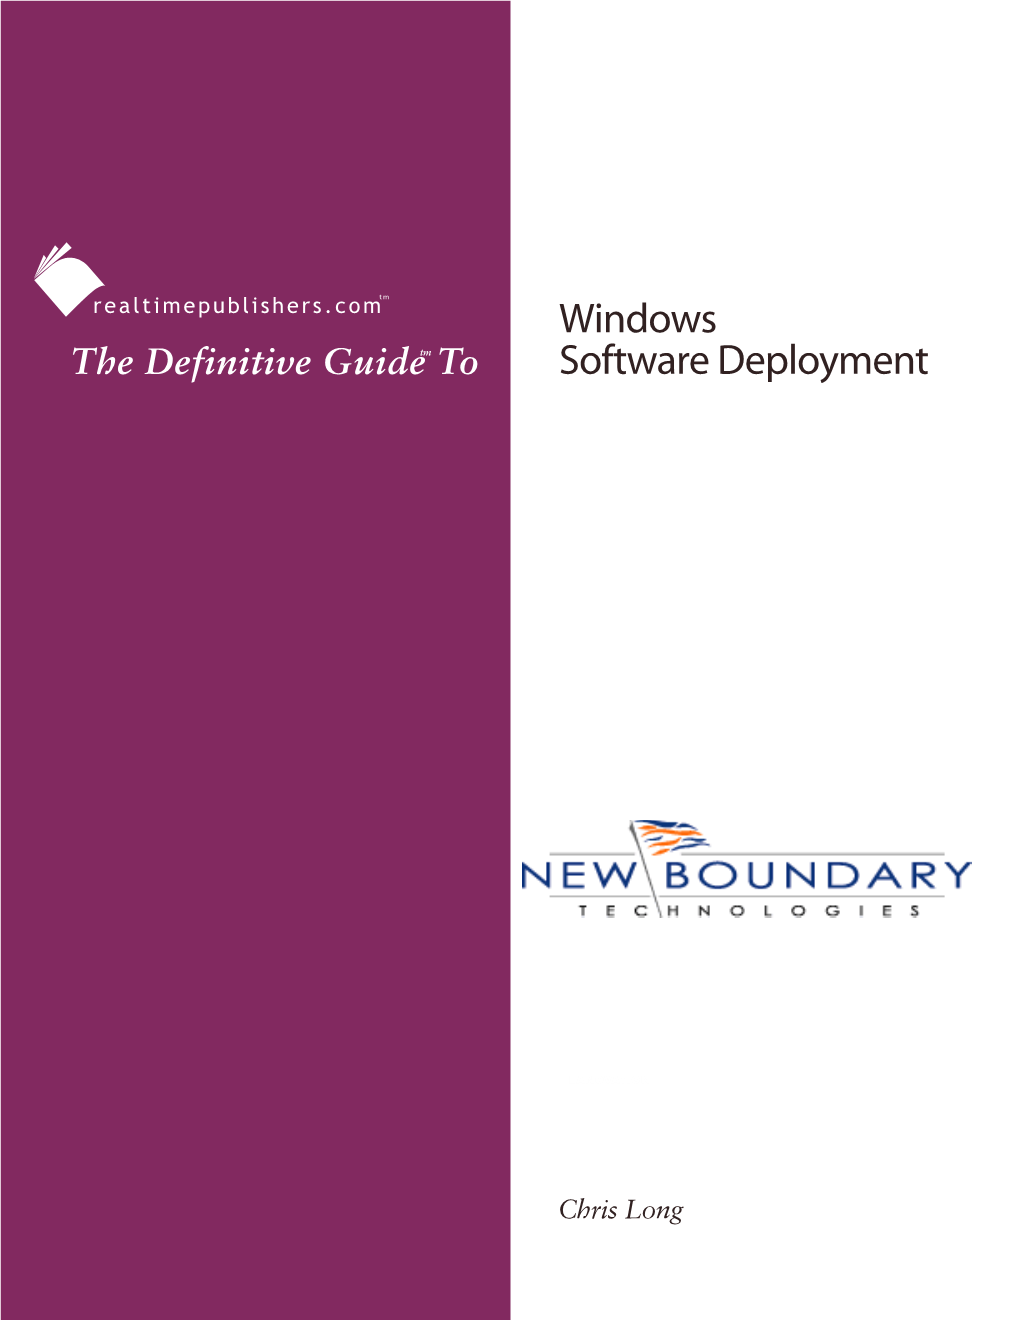 The Definitive Guide to Windows Software Deployment